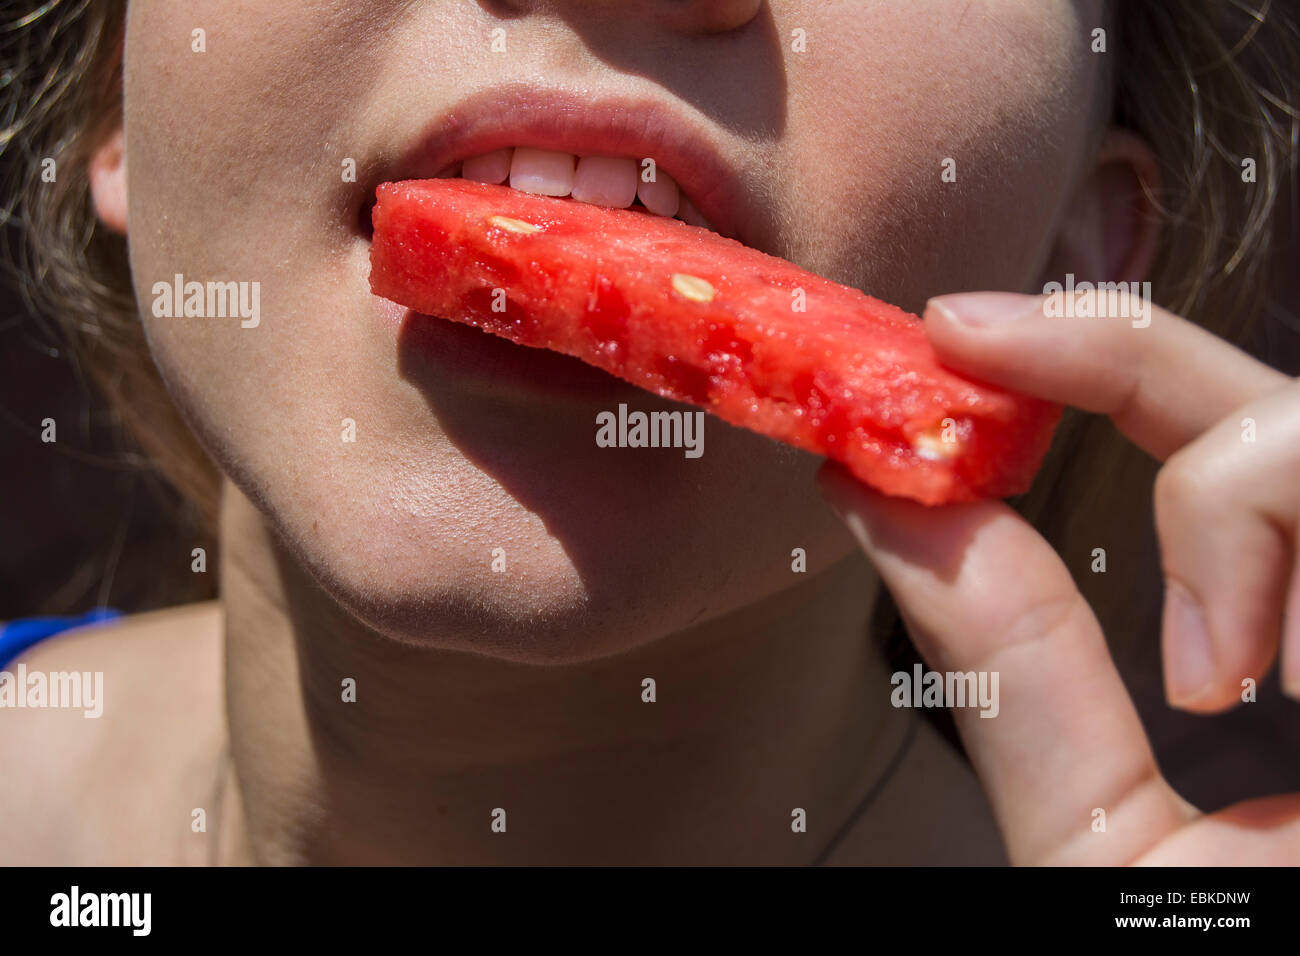 Young woman about to bite into a slice of watermelon Stock Photo